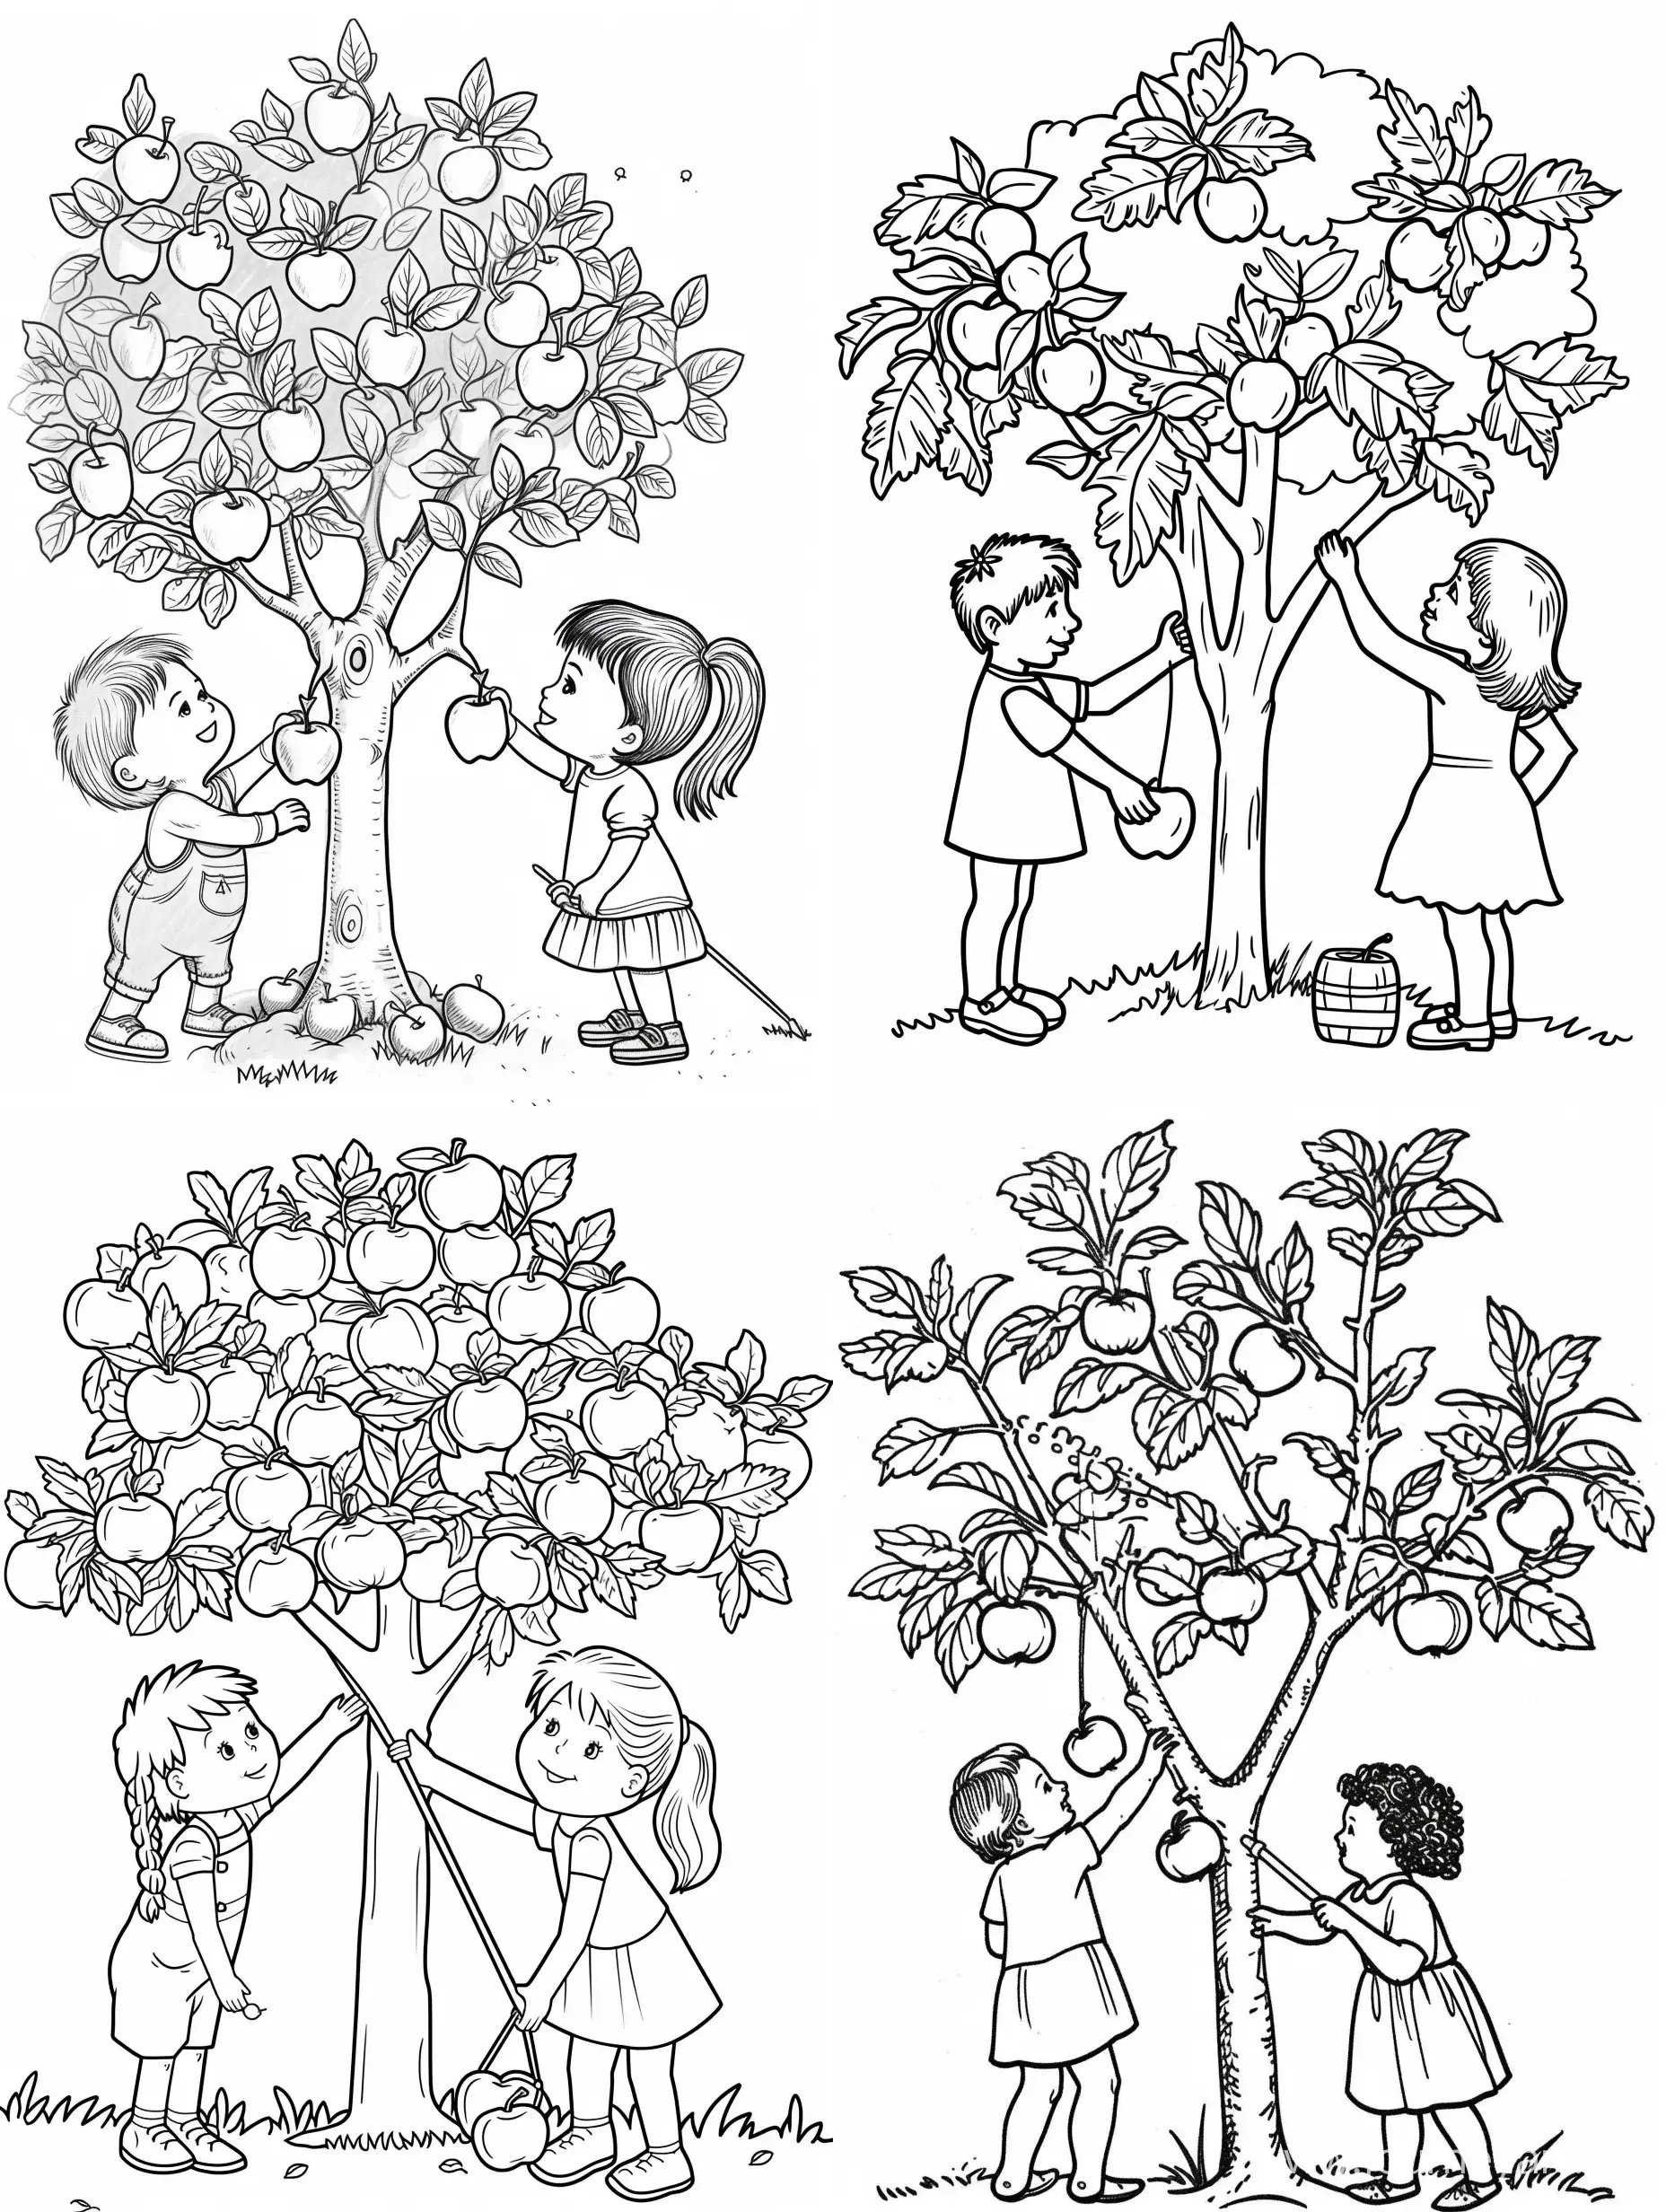 Make outline drawing of Boy and girl picking apples from apple tree